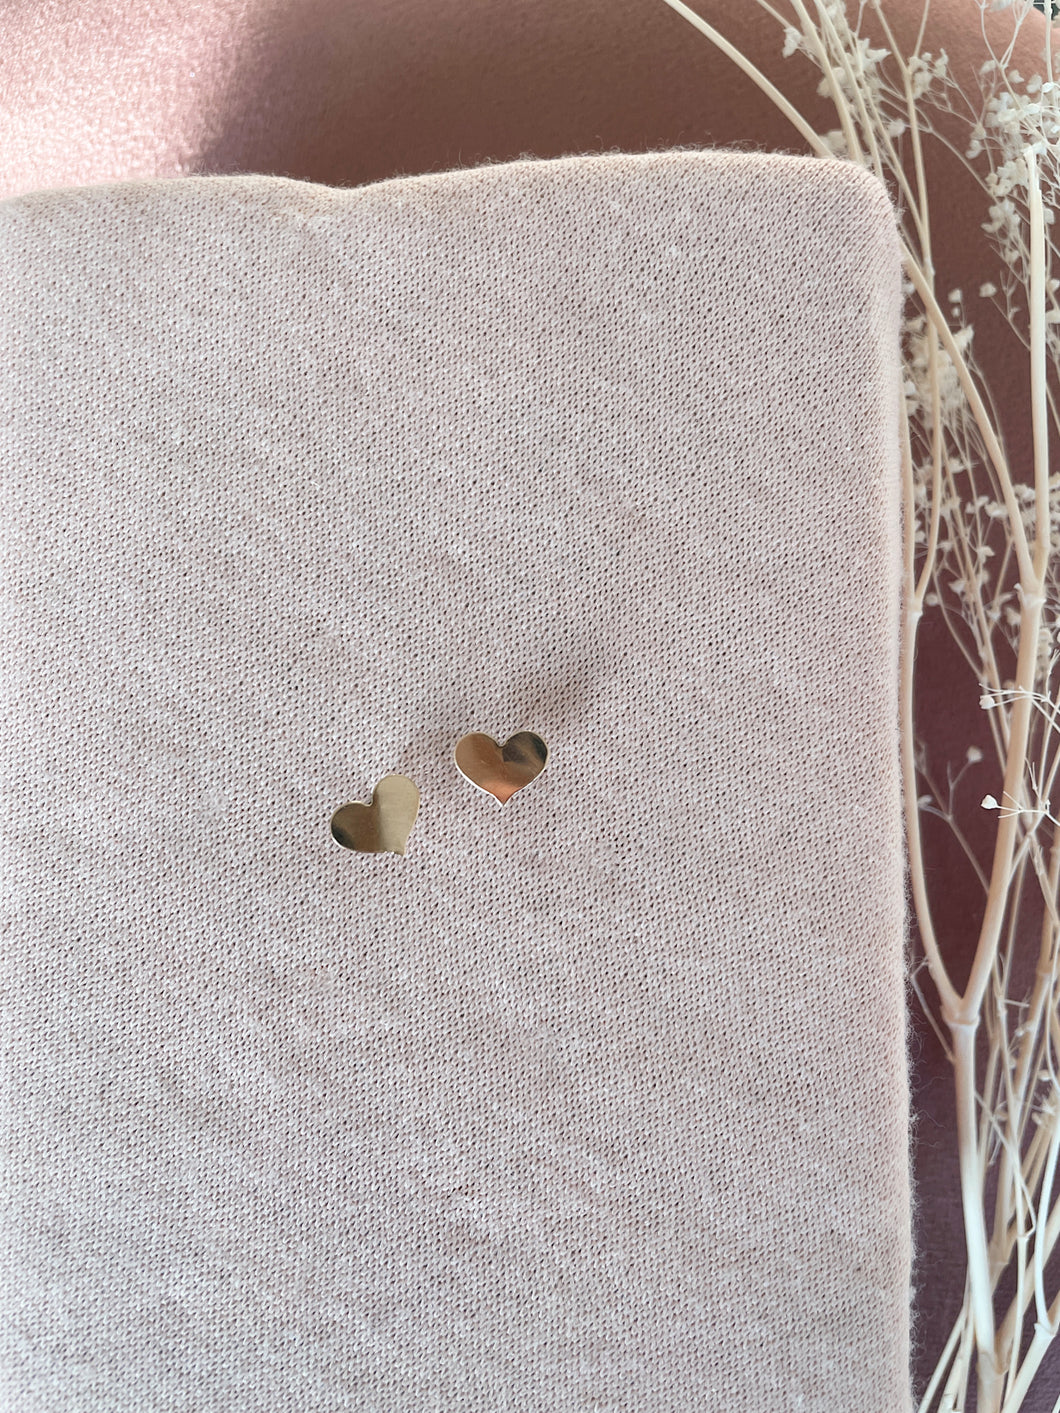 Gold Filled Heart Studs- MTO